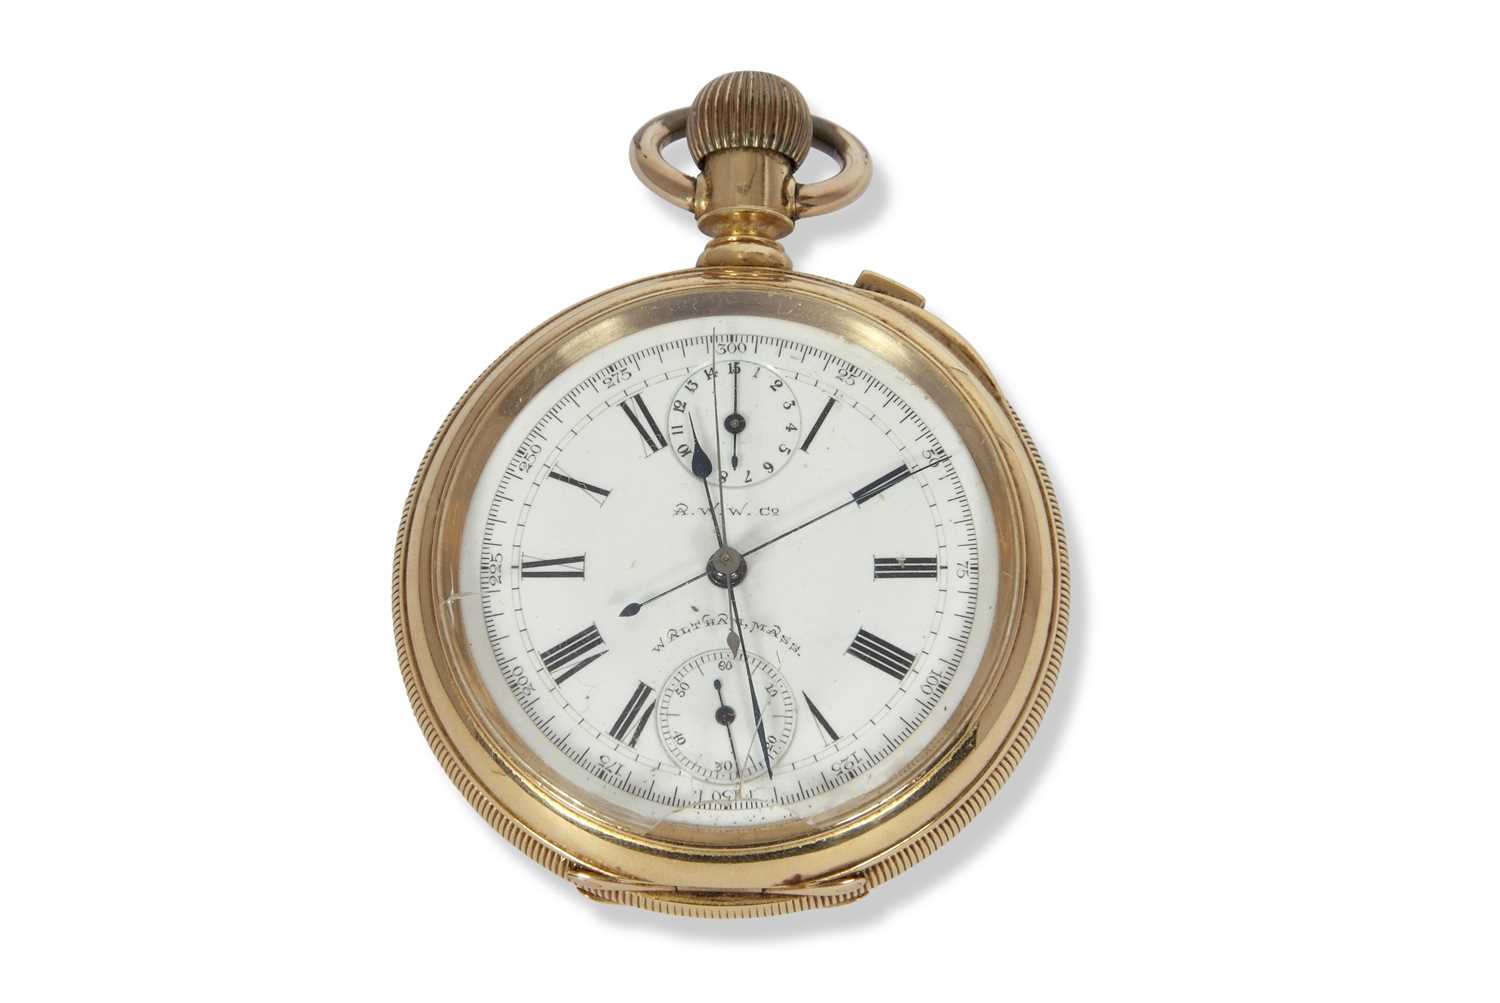 Waltham yellow metal chronograph pocket watch stamped 18k in the case back, it has a white enamel